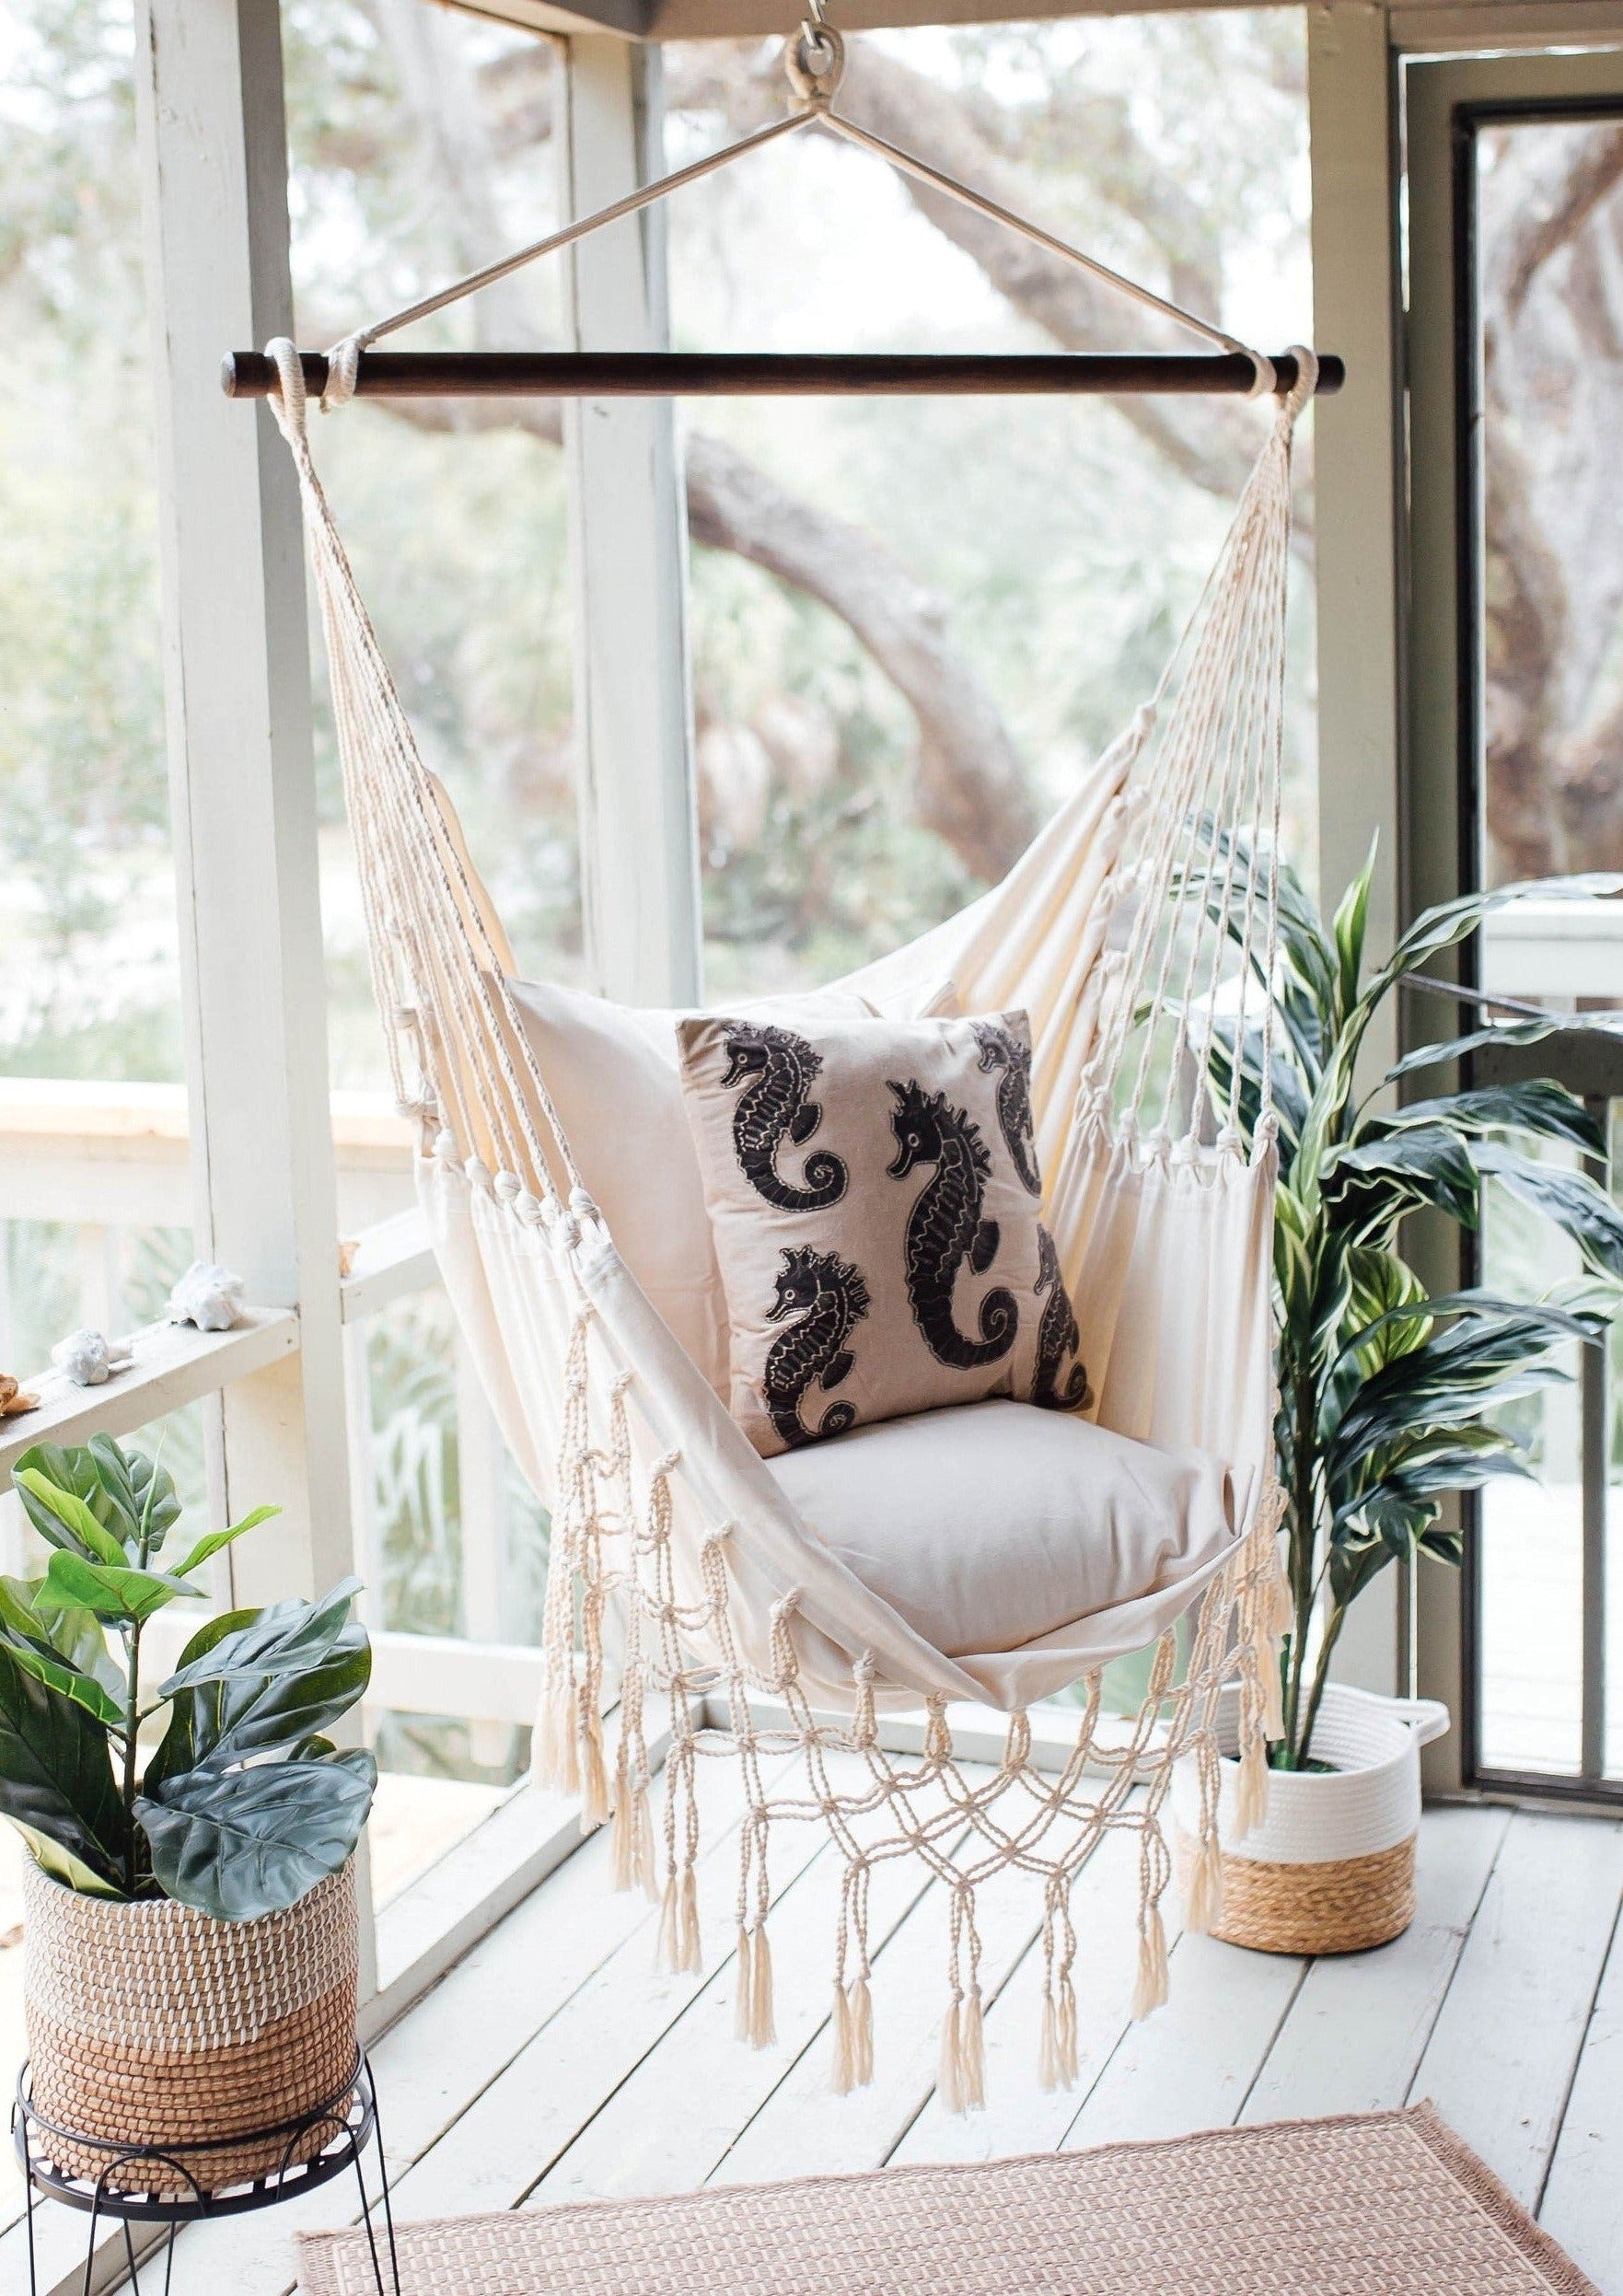 macrame hanging swing chair on a patio outdoors